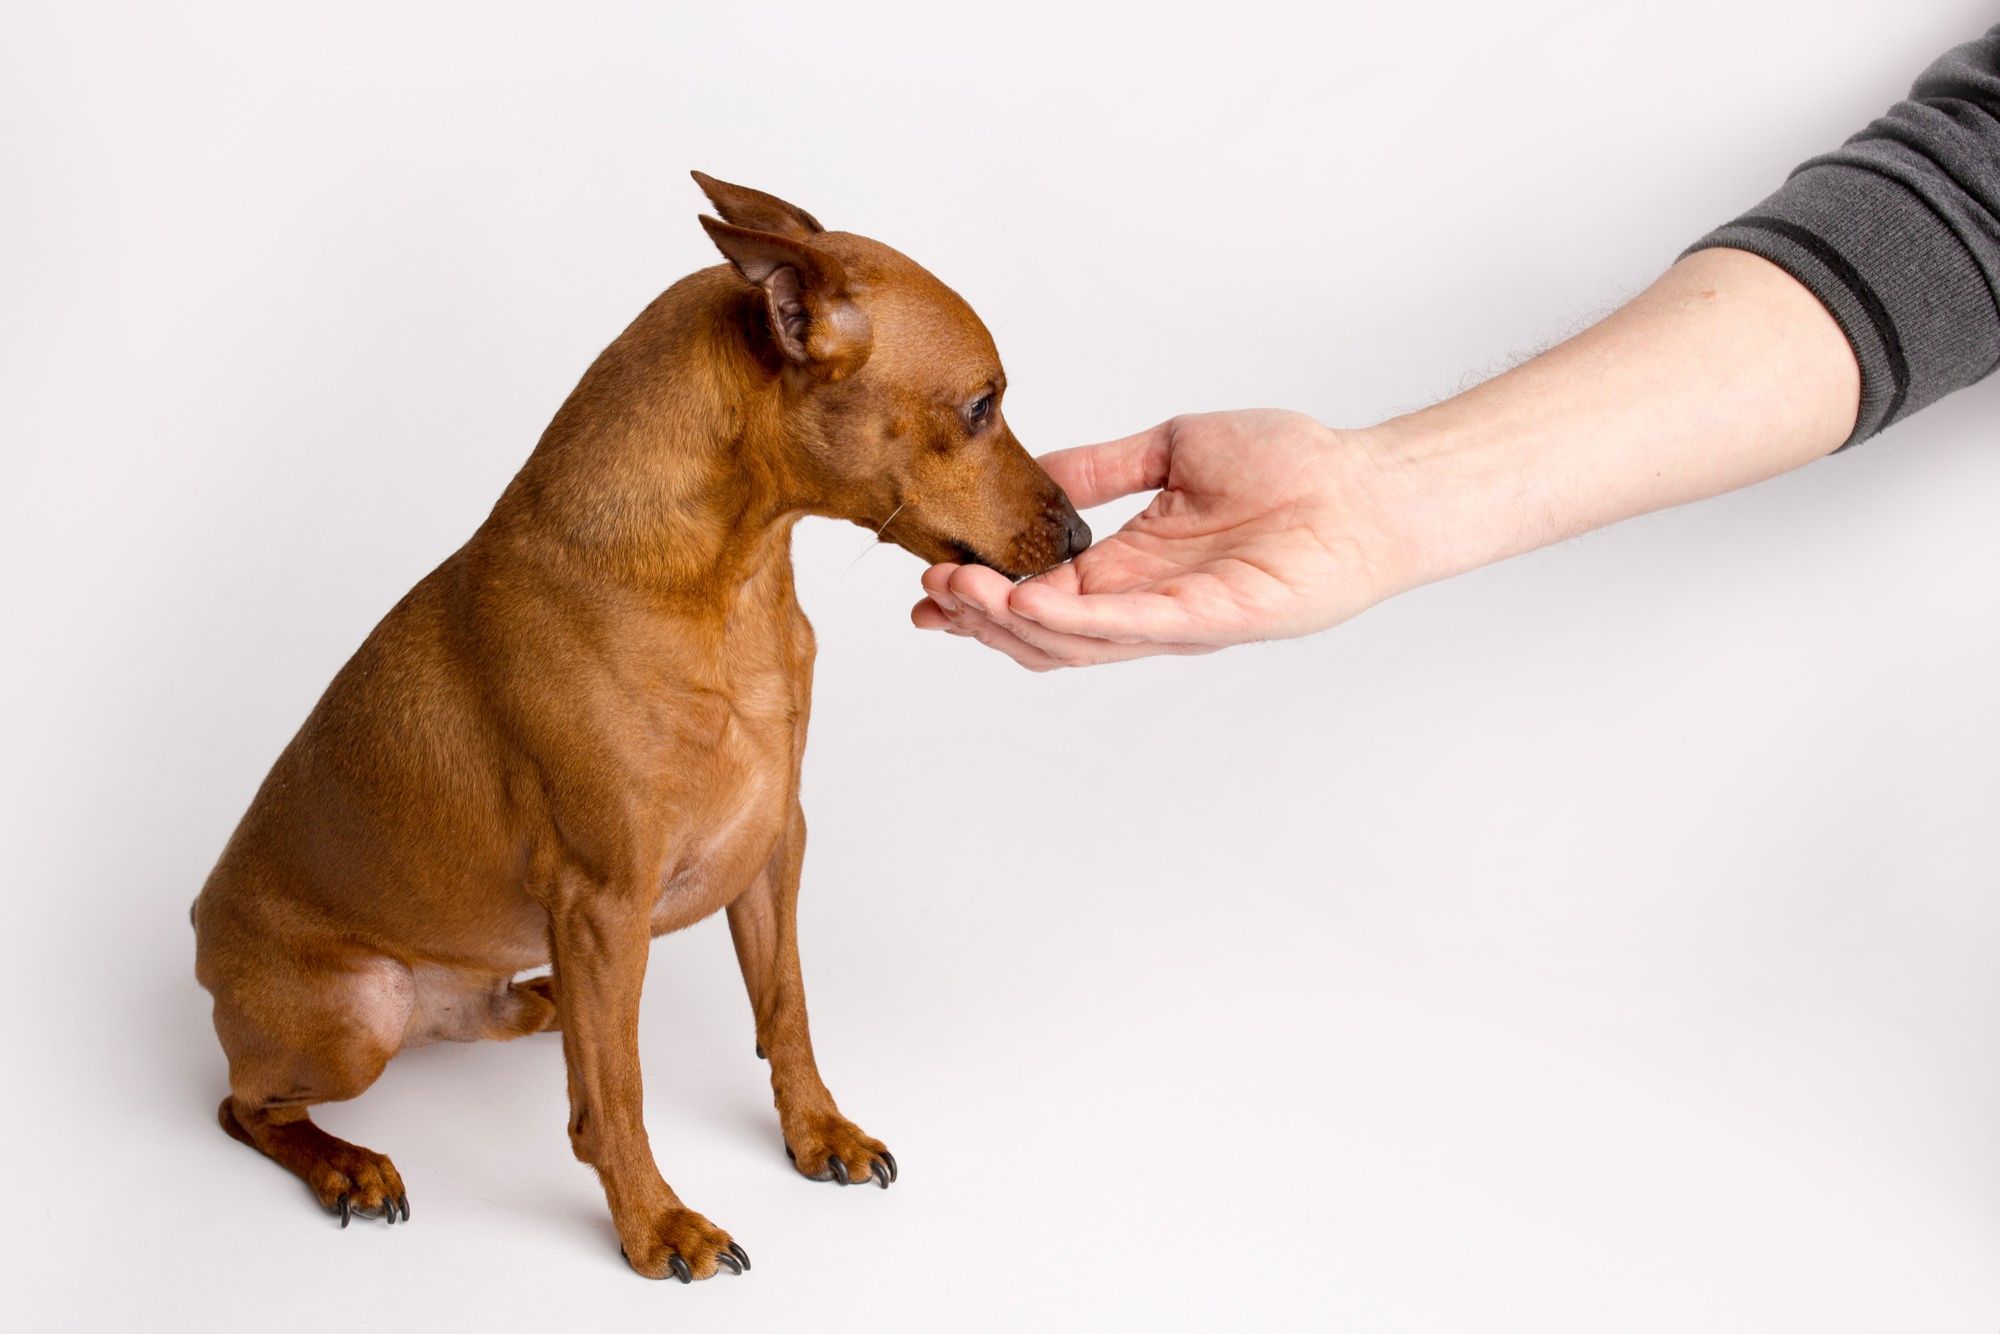 What Does It Mean When A Dog Licks Your Hand?